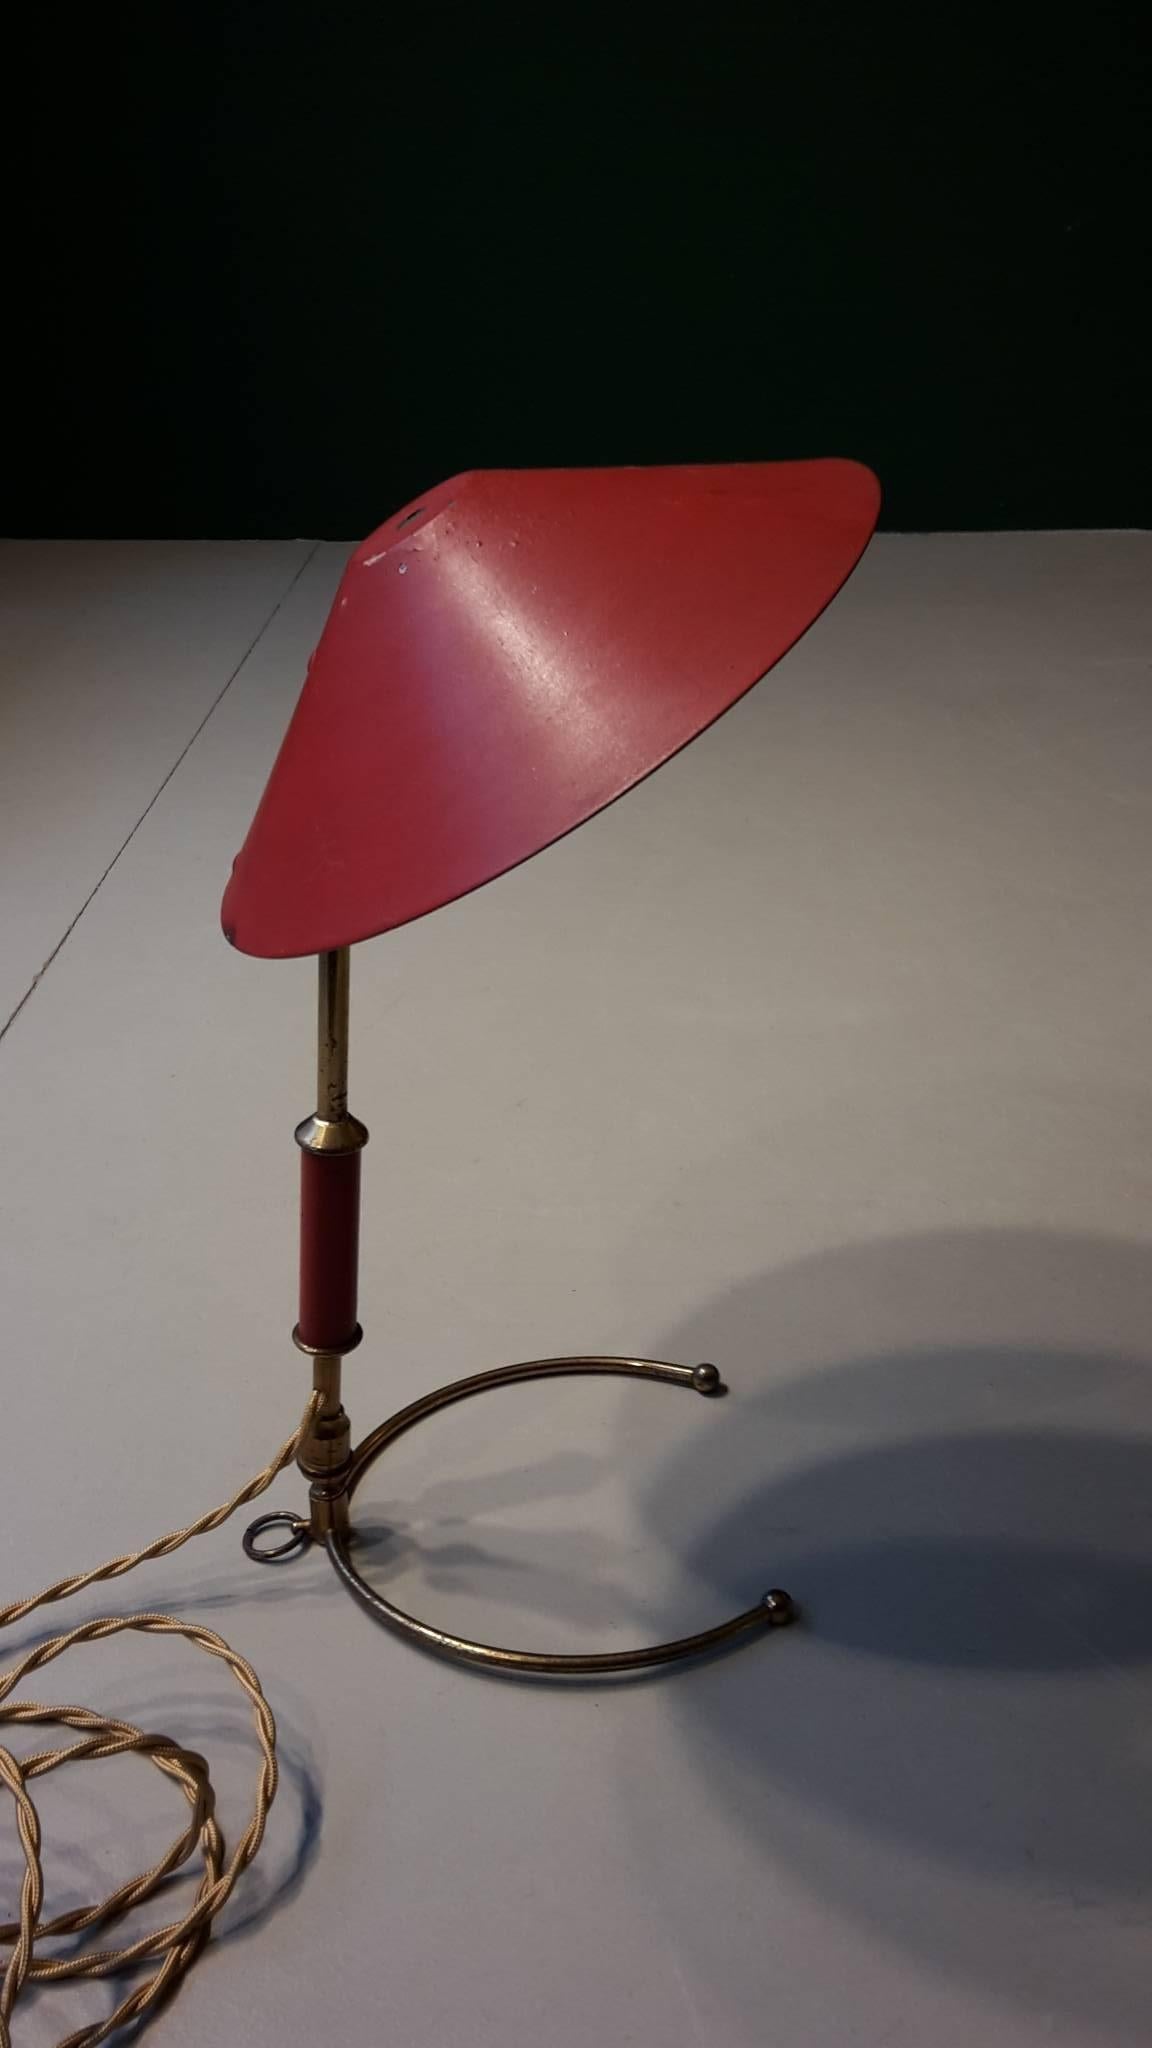 20th century French red reading lamp made of brass and enameled metal 1960s. The shade and the arm are adjustable.